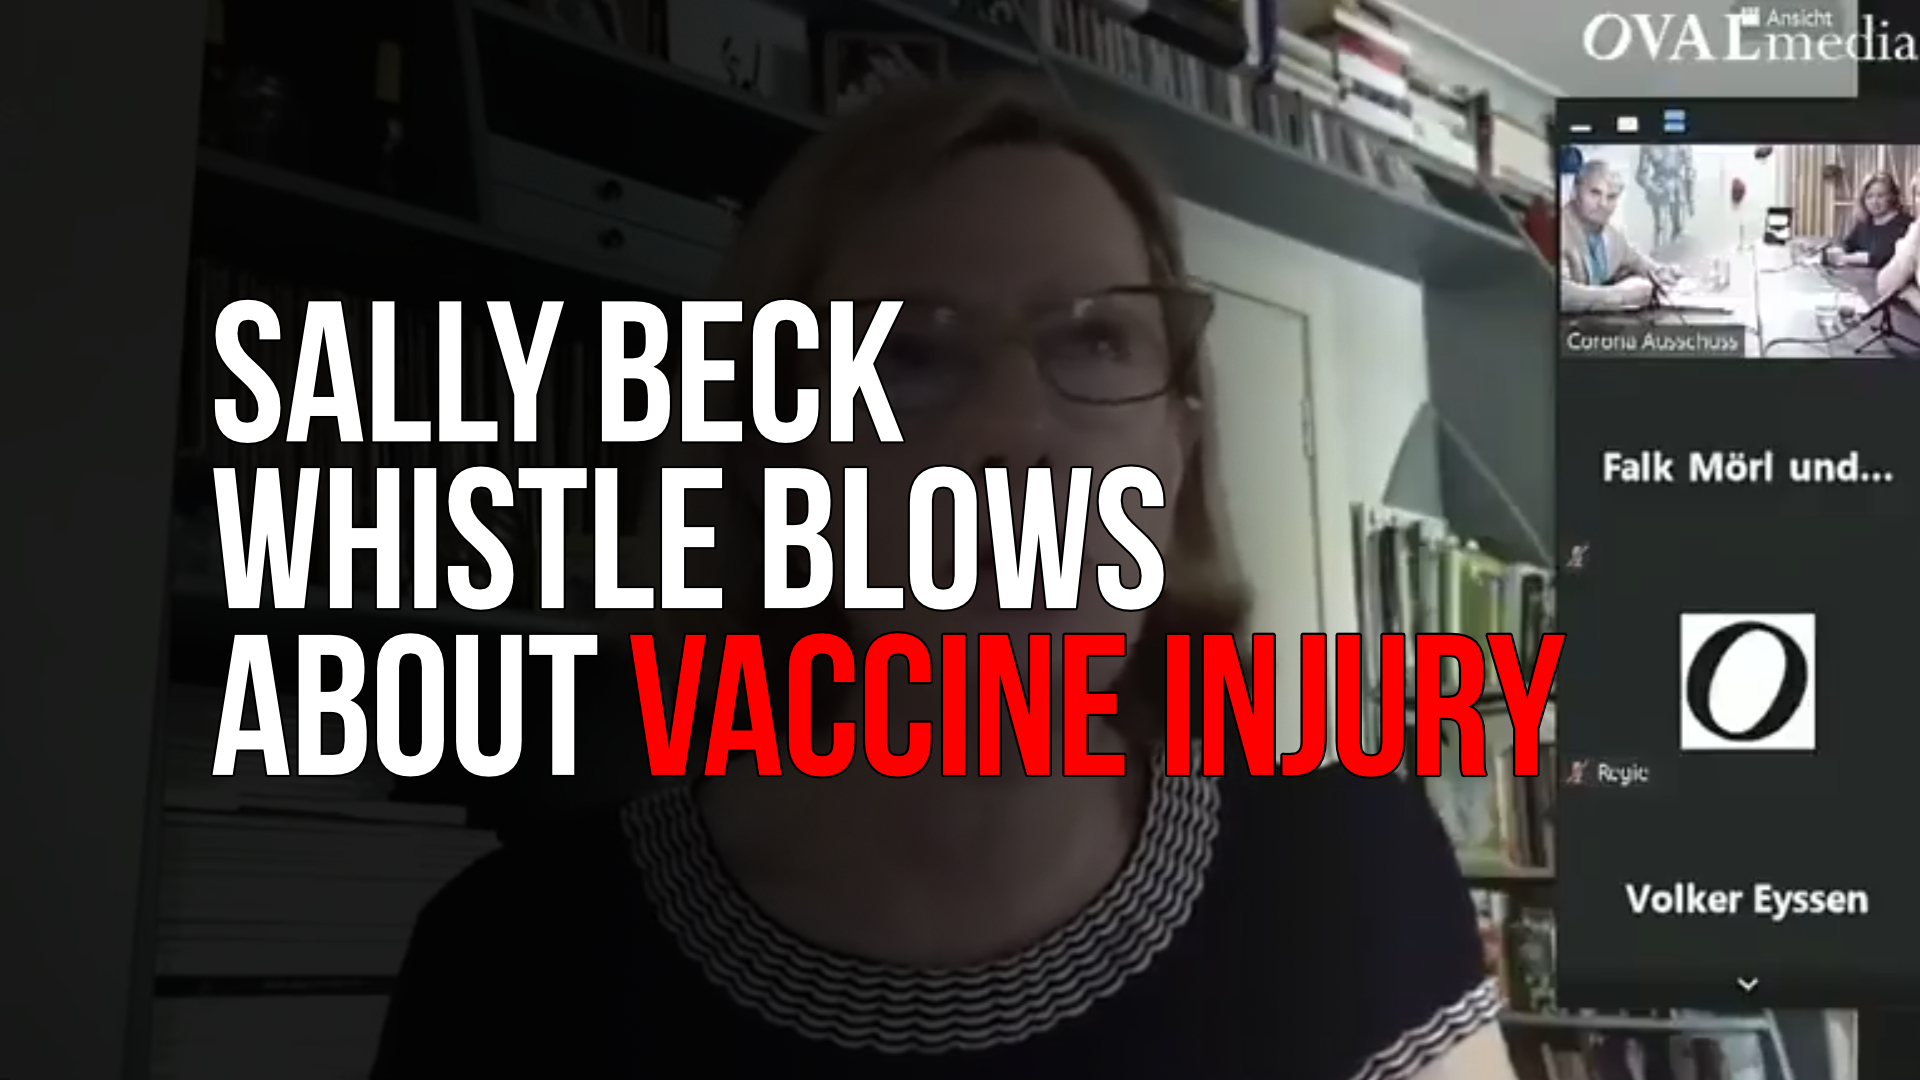 Sally Beck Blows Whistle on MSM Cover-Up of Vax Injury